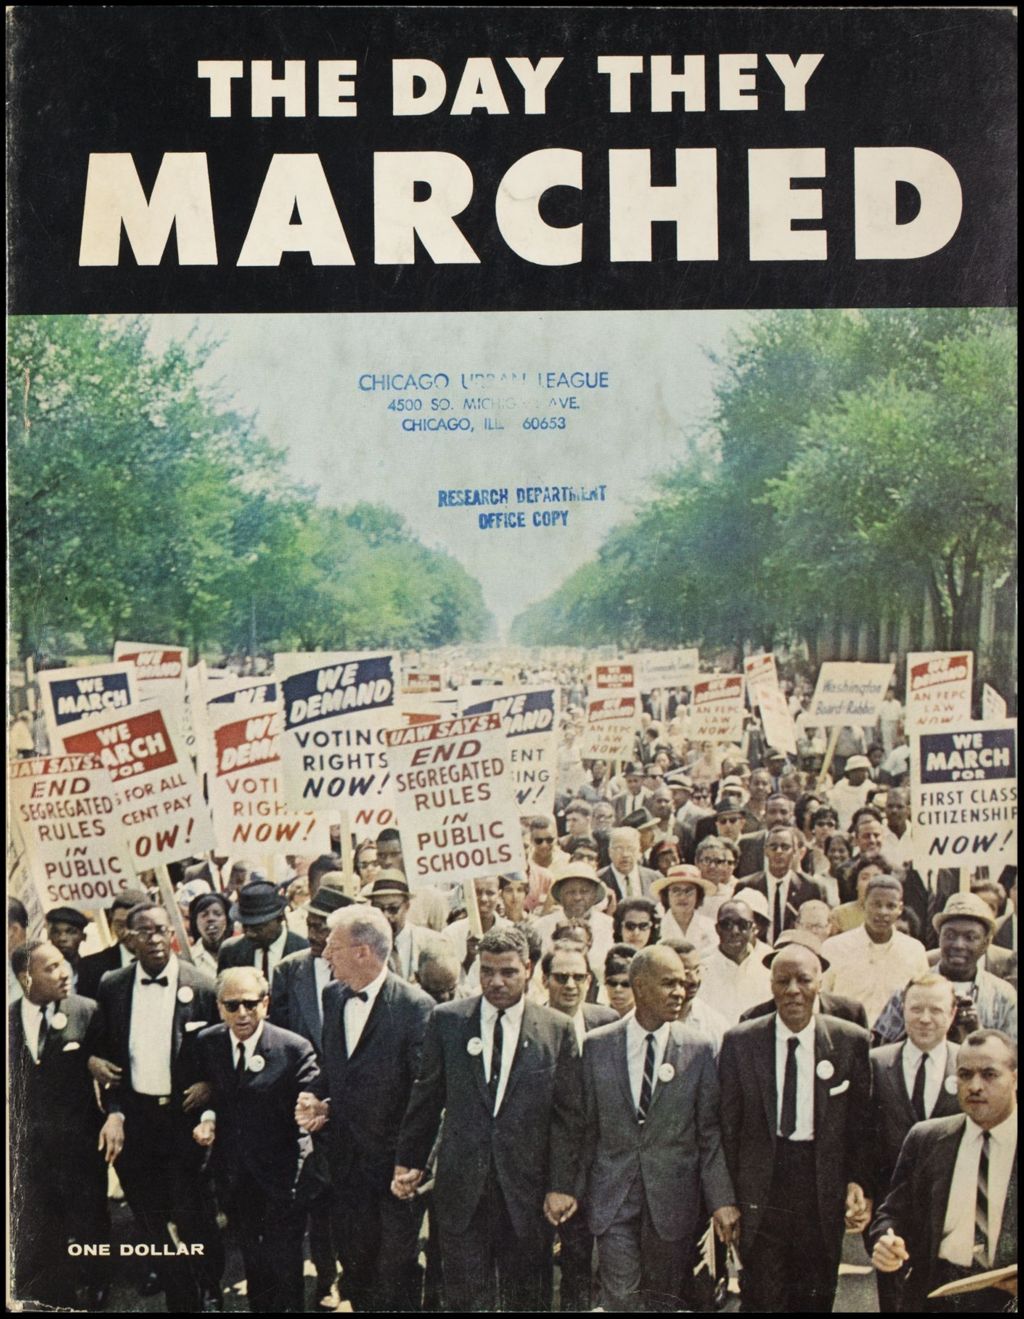 The Day they Marched, 1963 (Folder III-2931)